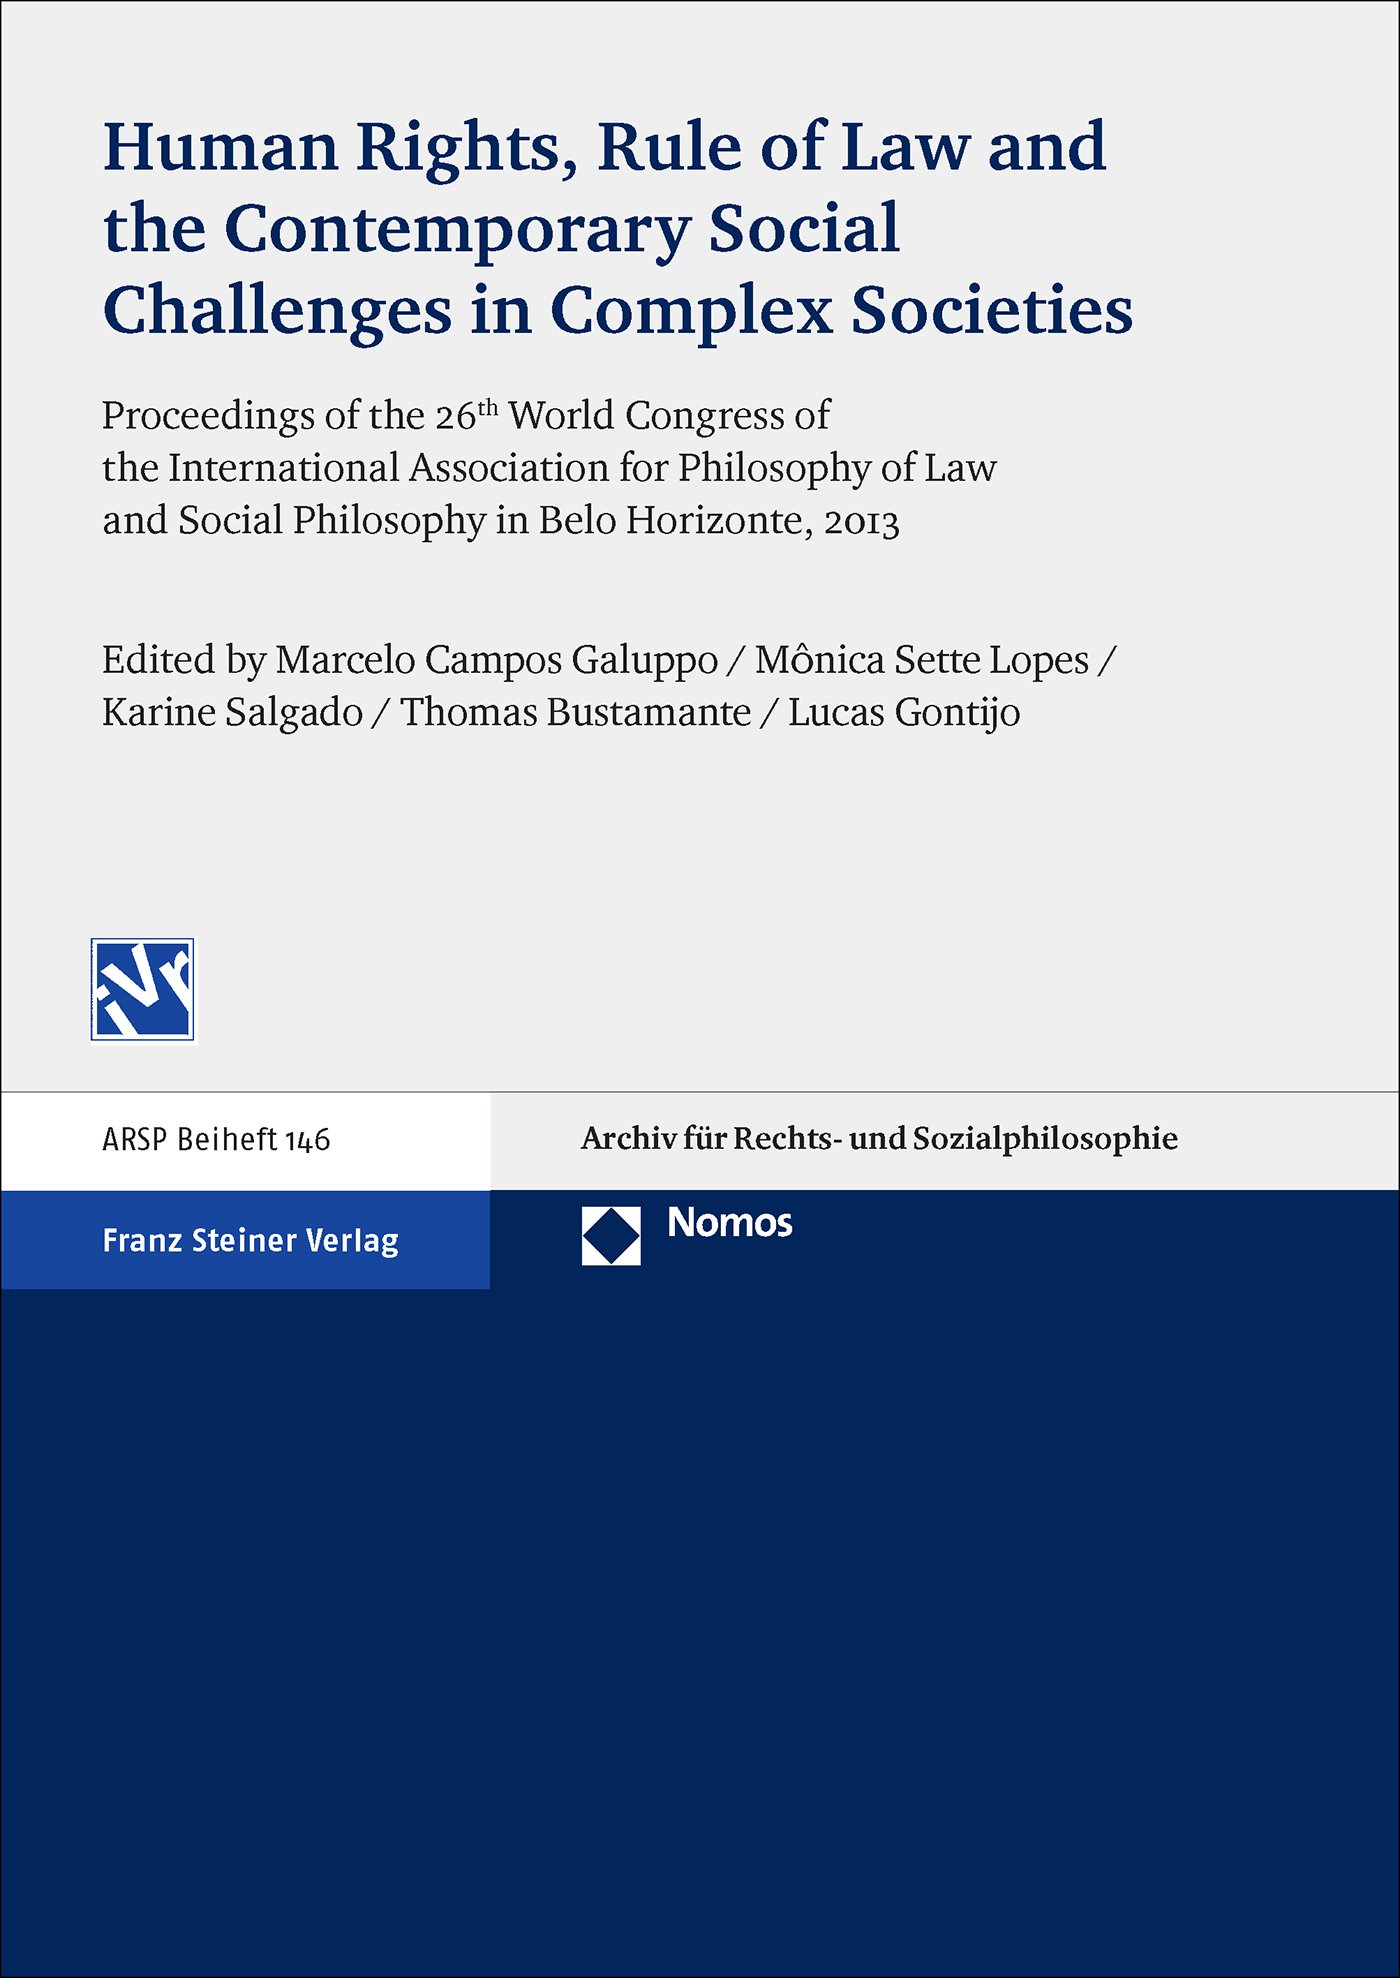 Human Rights, Rule of Law and the Contemporary Social Challenges in Complex Societies